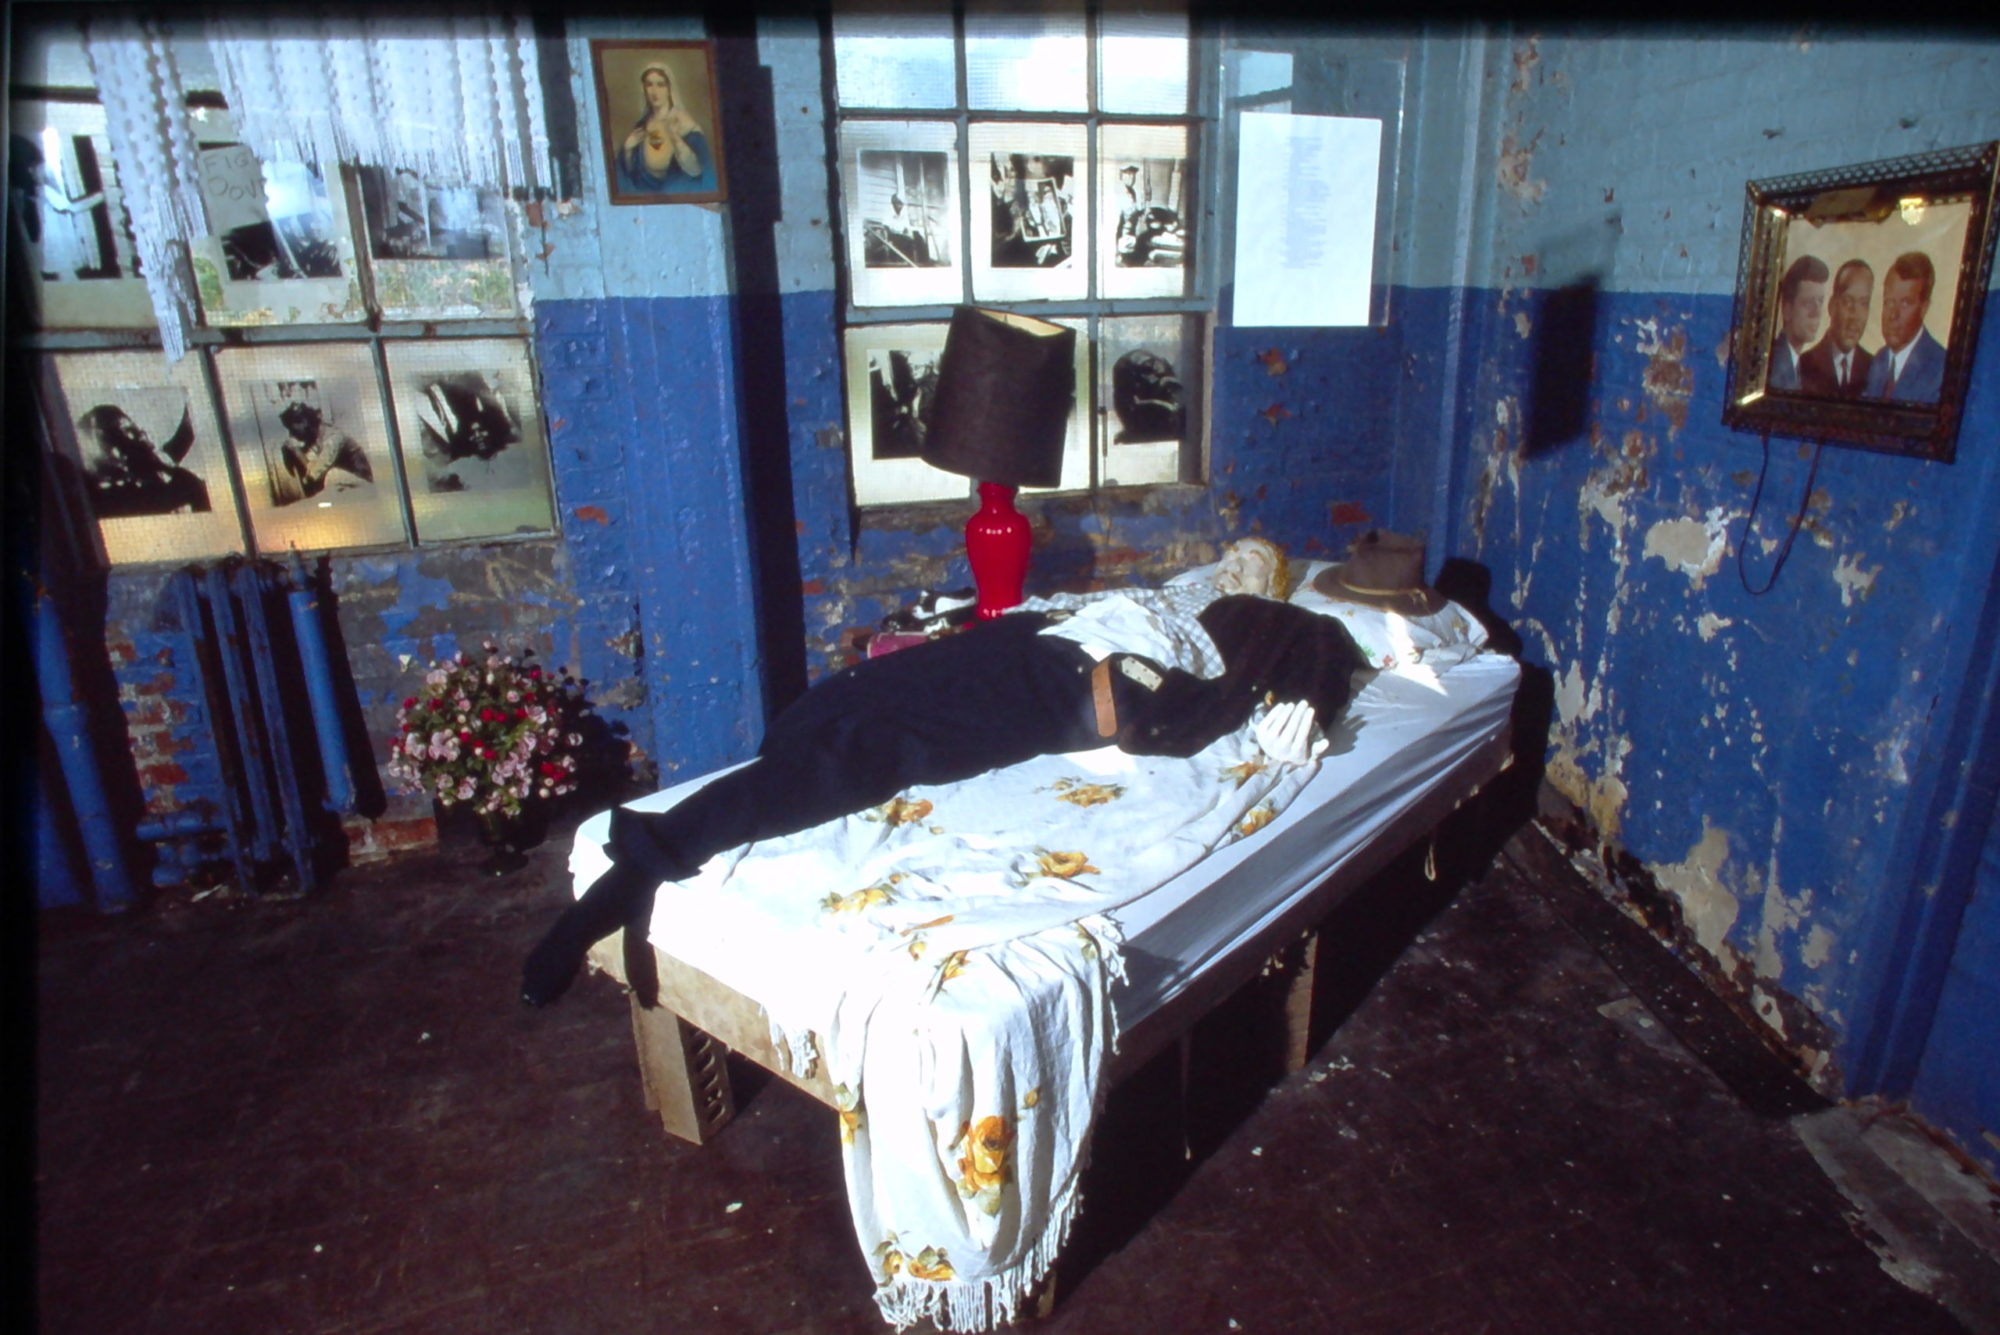 A photograph of someone's room with blue-painted walls — and many chips in the paint. An individual lies motionless on a bed in the center of the room, and many portraits hang on the walls and in the windowpanes.